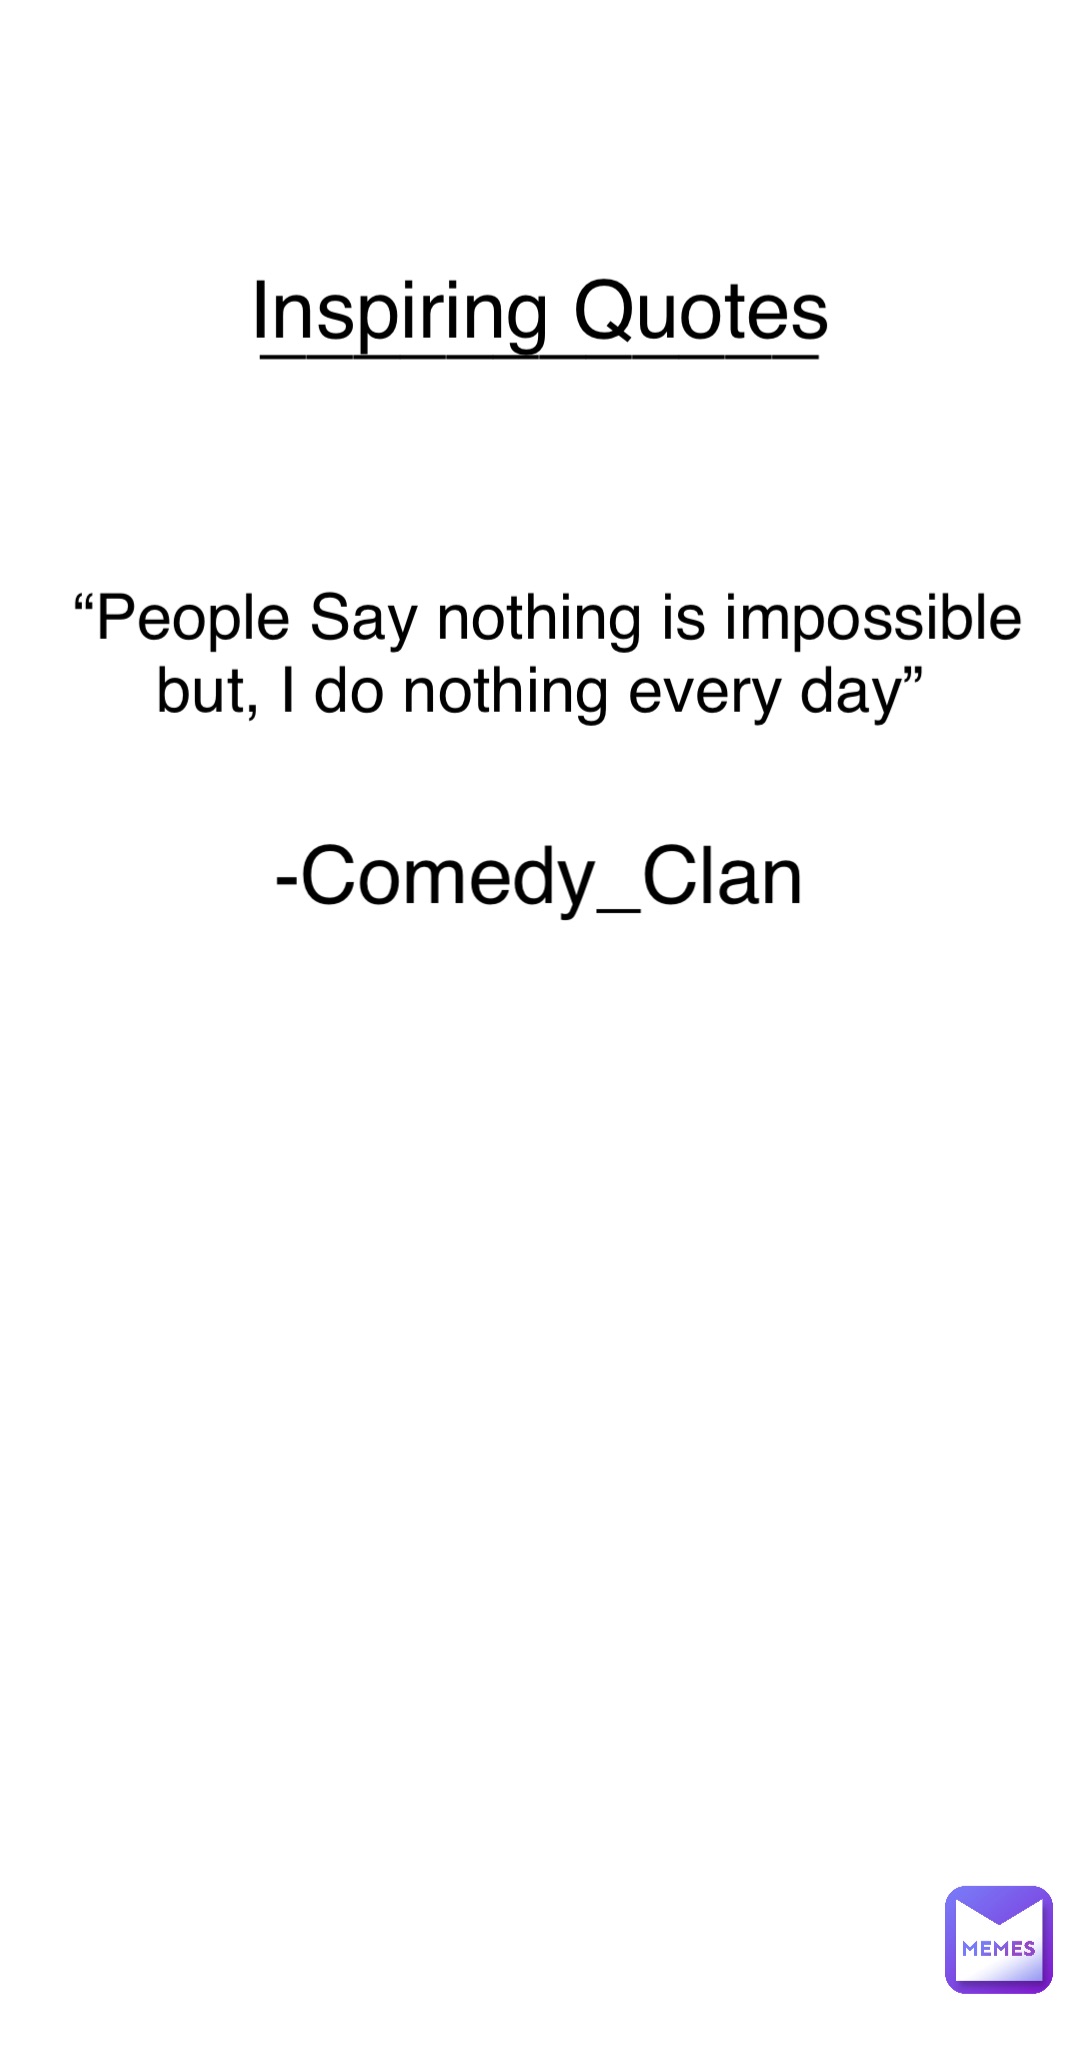 Double tap to edit “ “People Say nothing is impossible but, I do nothing every day” -Comedy_Clan ____________ Inspiring Quotes